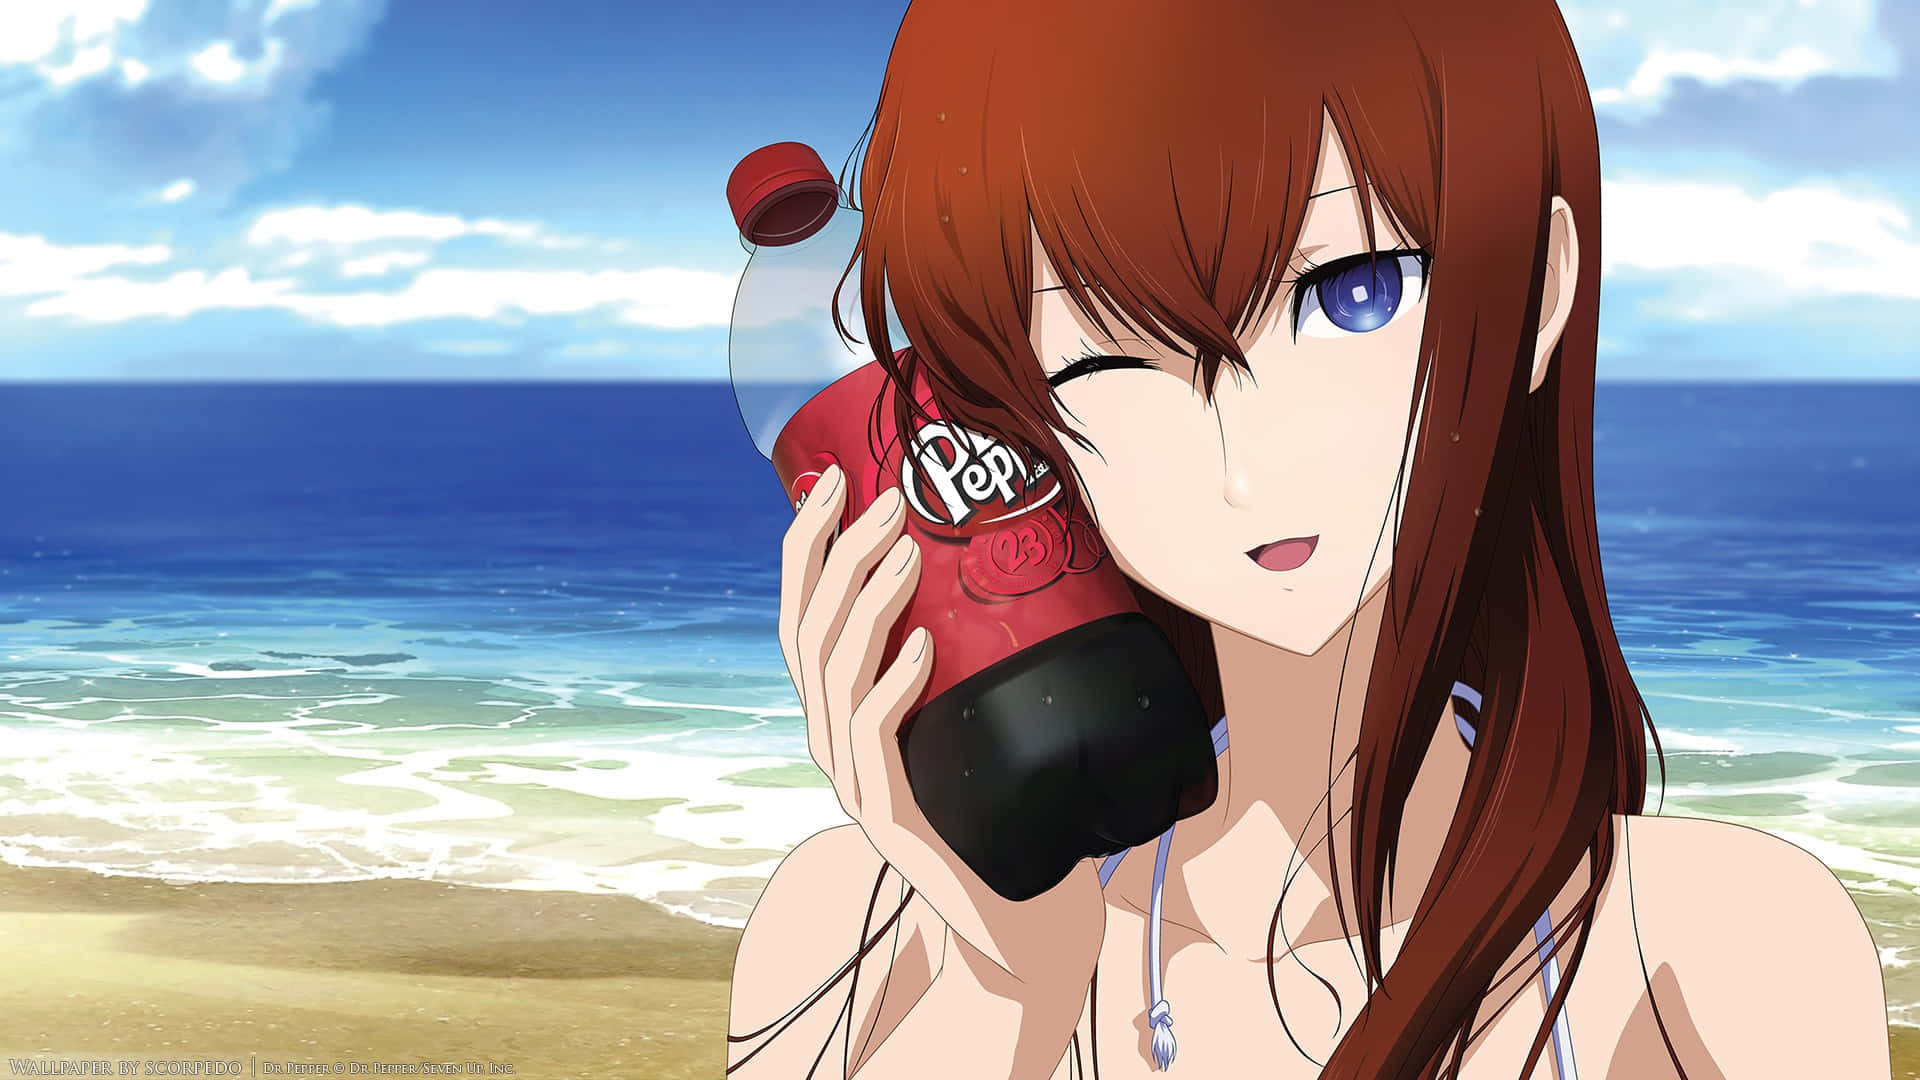 A Girl With Long Hair And Red Hair Is Holding A Coca Cola Bottle Wallpaper